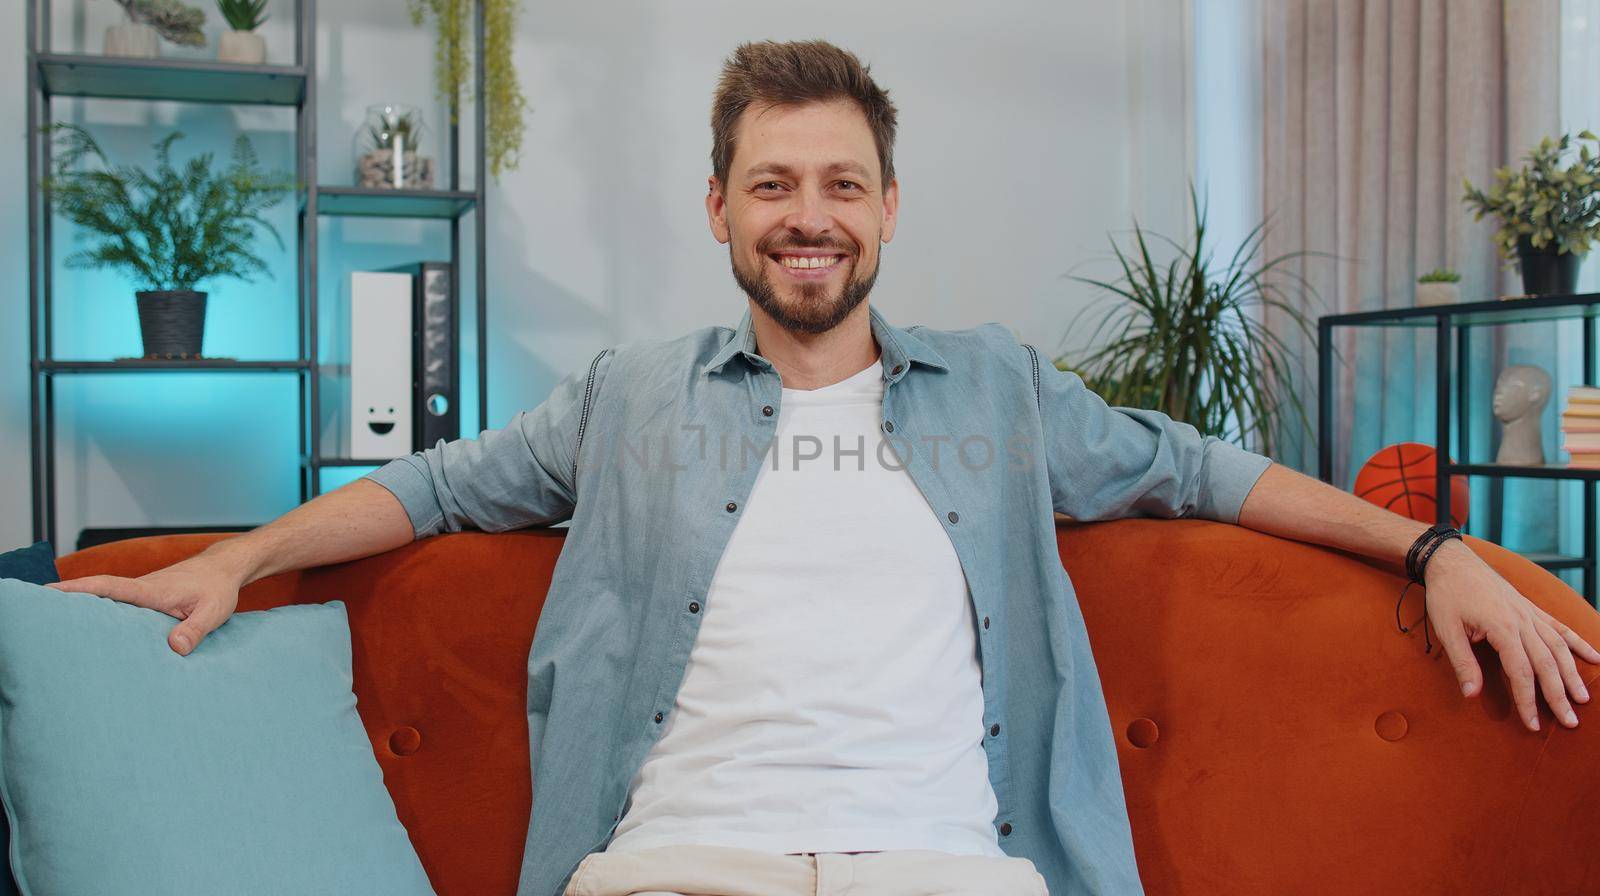 Close-up portrait of happy smiling caucasian adult man in shirt, looking at camera, celebrate good news. Young guy indoors isolated at home in living room sitting on orange couch. Male nature beauty